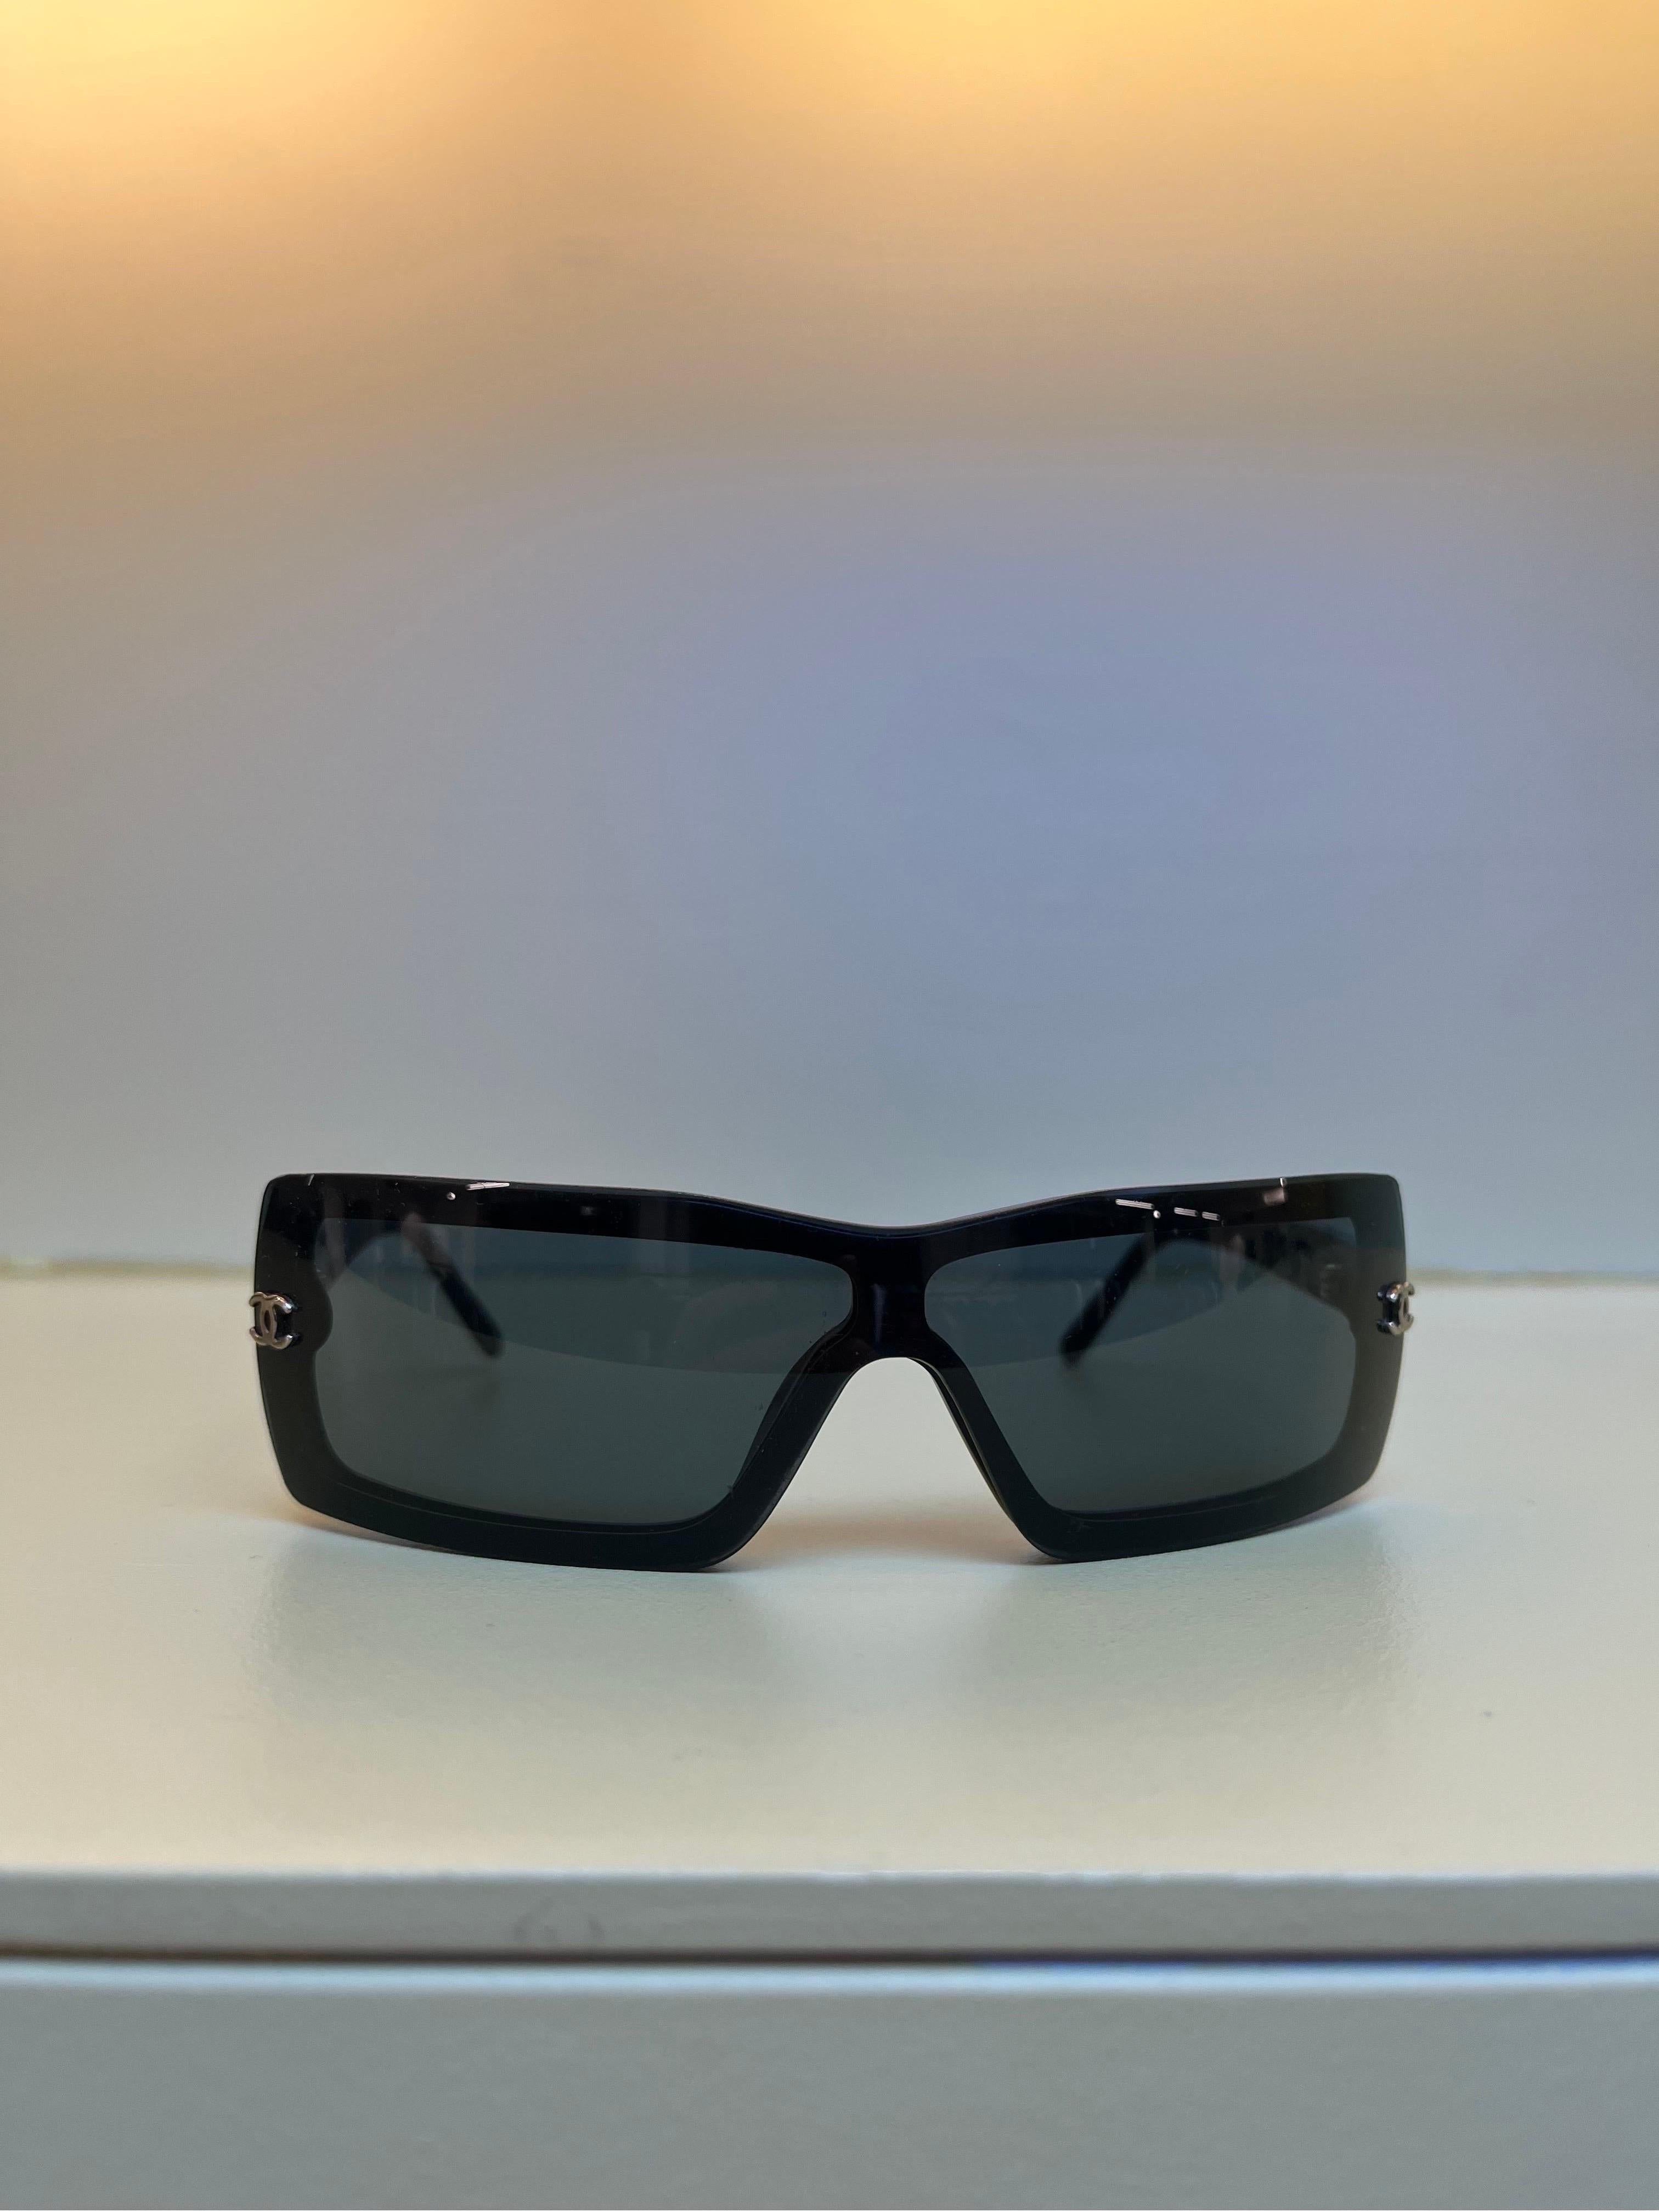 Chanel 5067 - 2 For Sale on 1stDibs  chanel 5067 sunglasses, chanel  sunglasses 5067